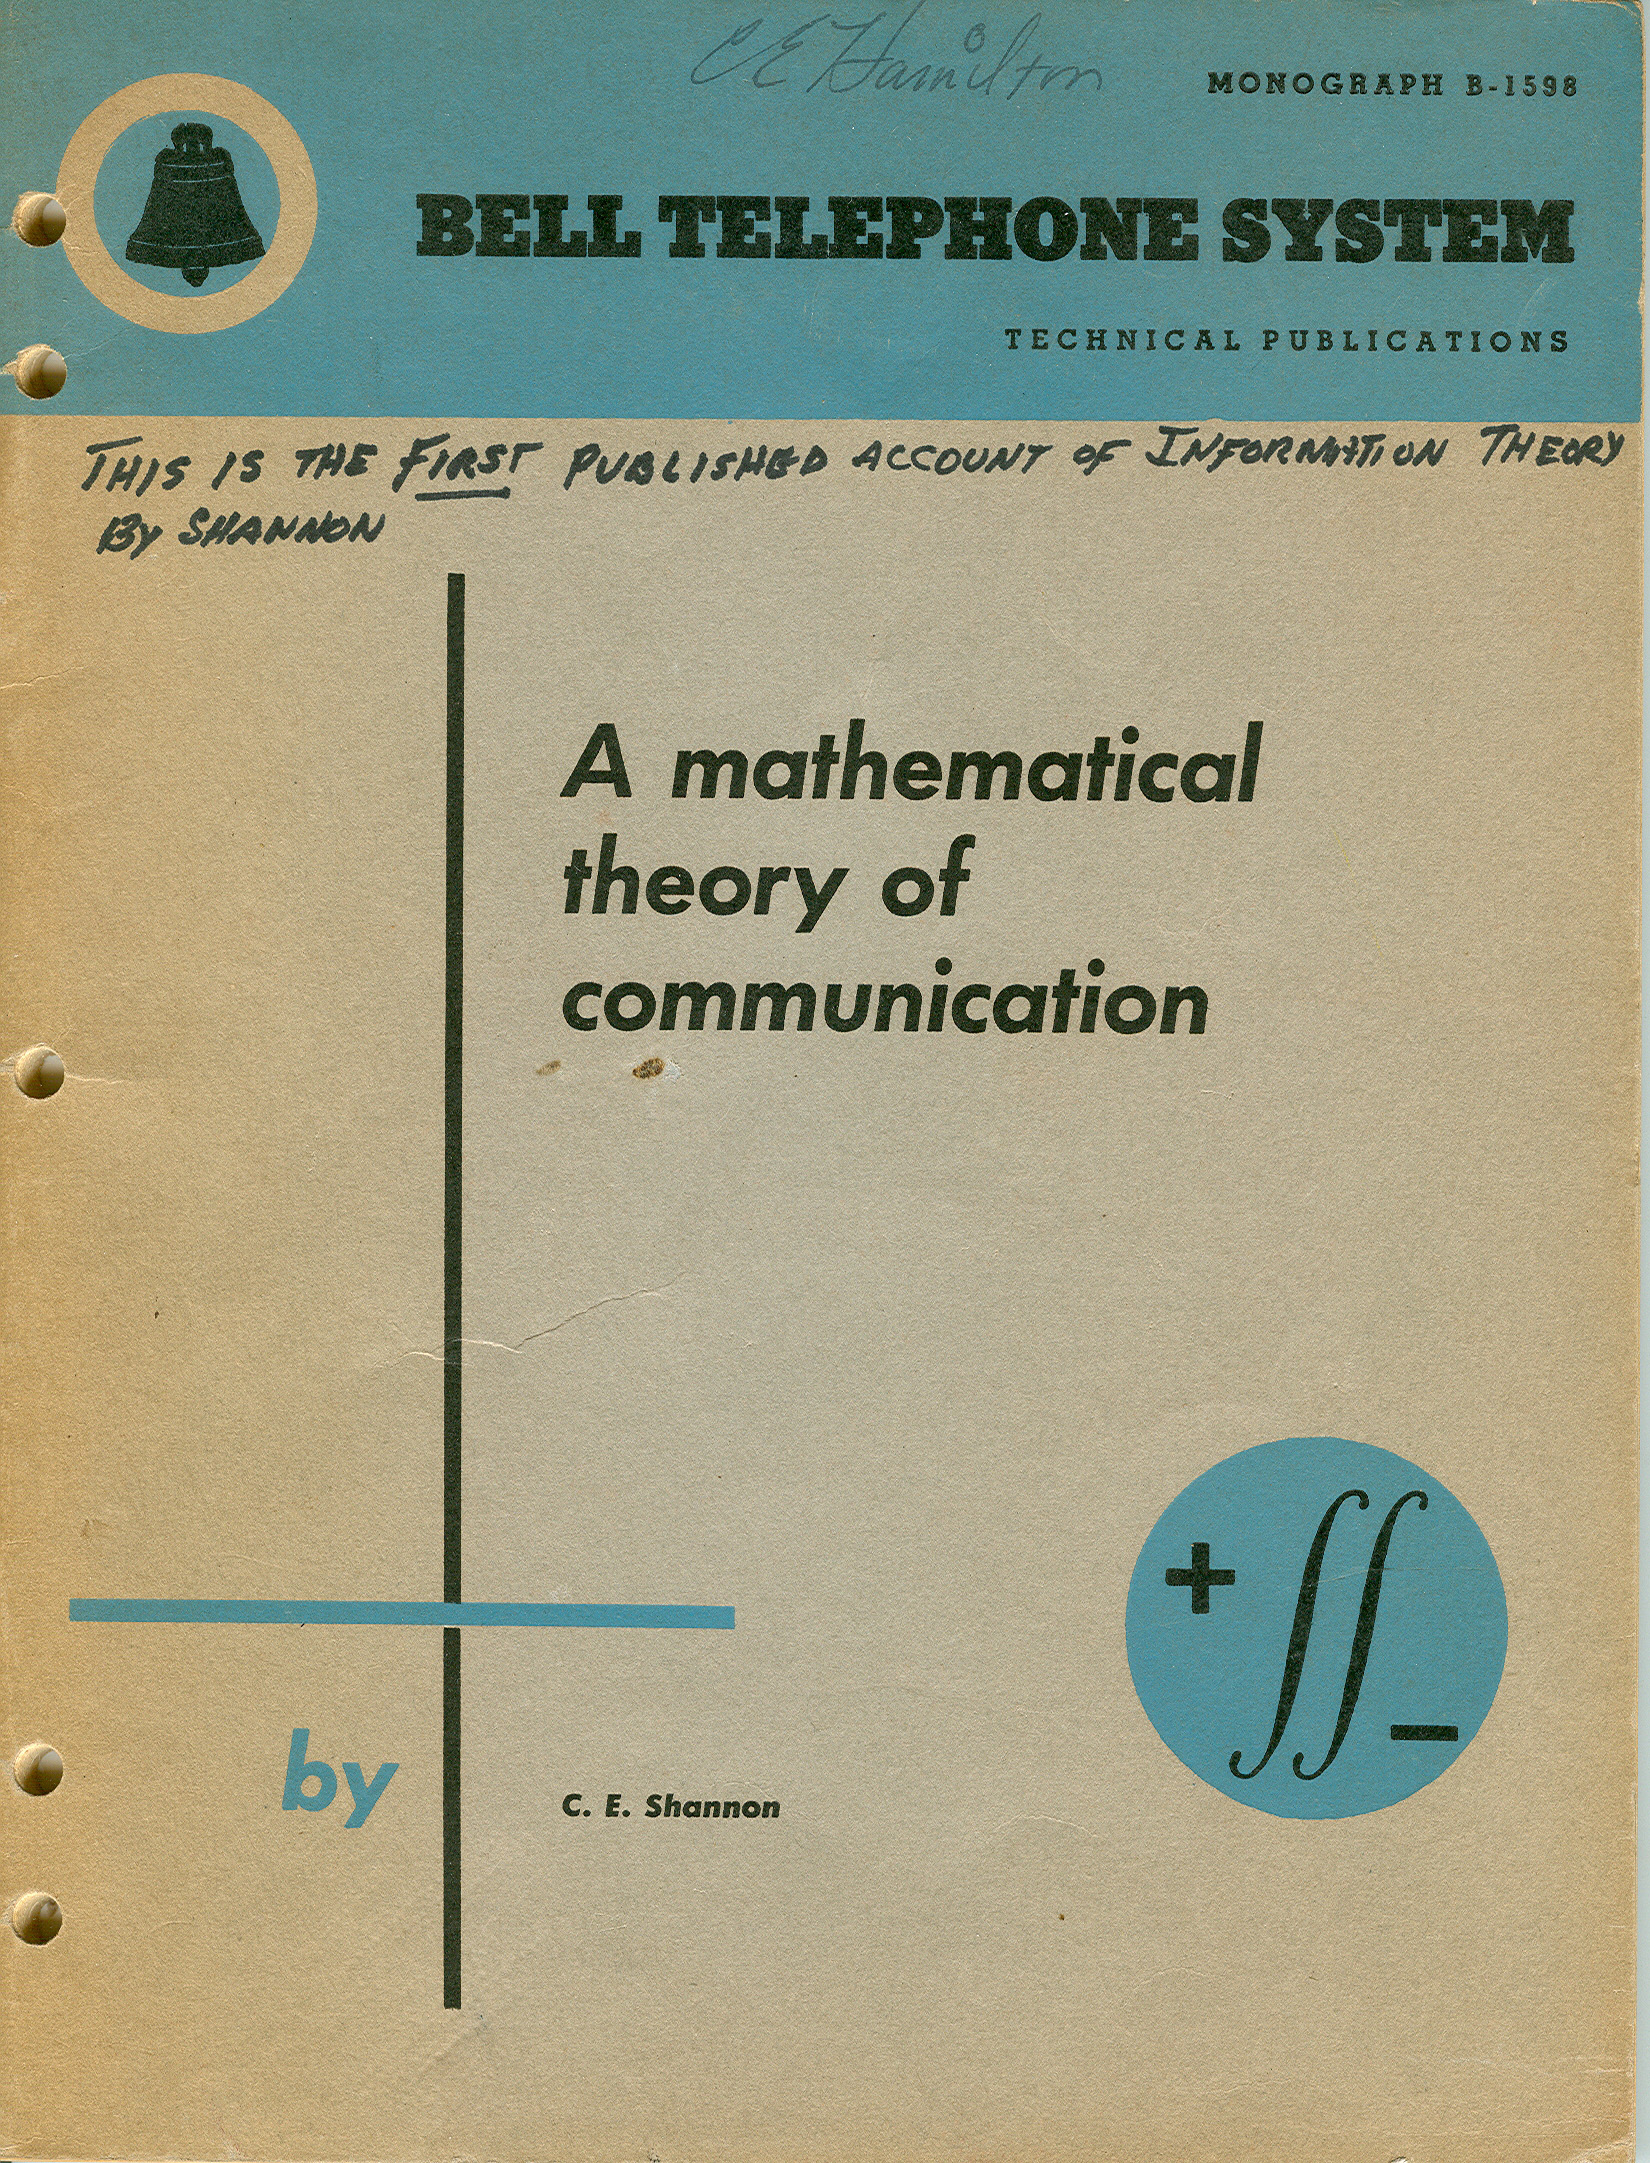 Cover of Monograph B-1598